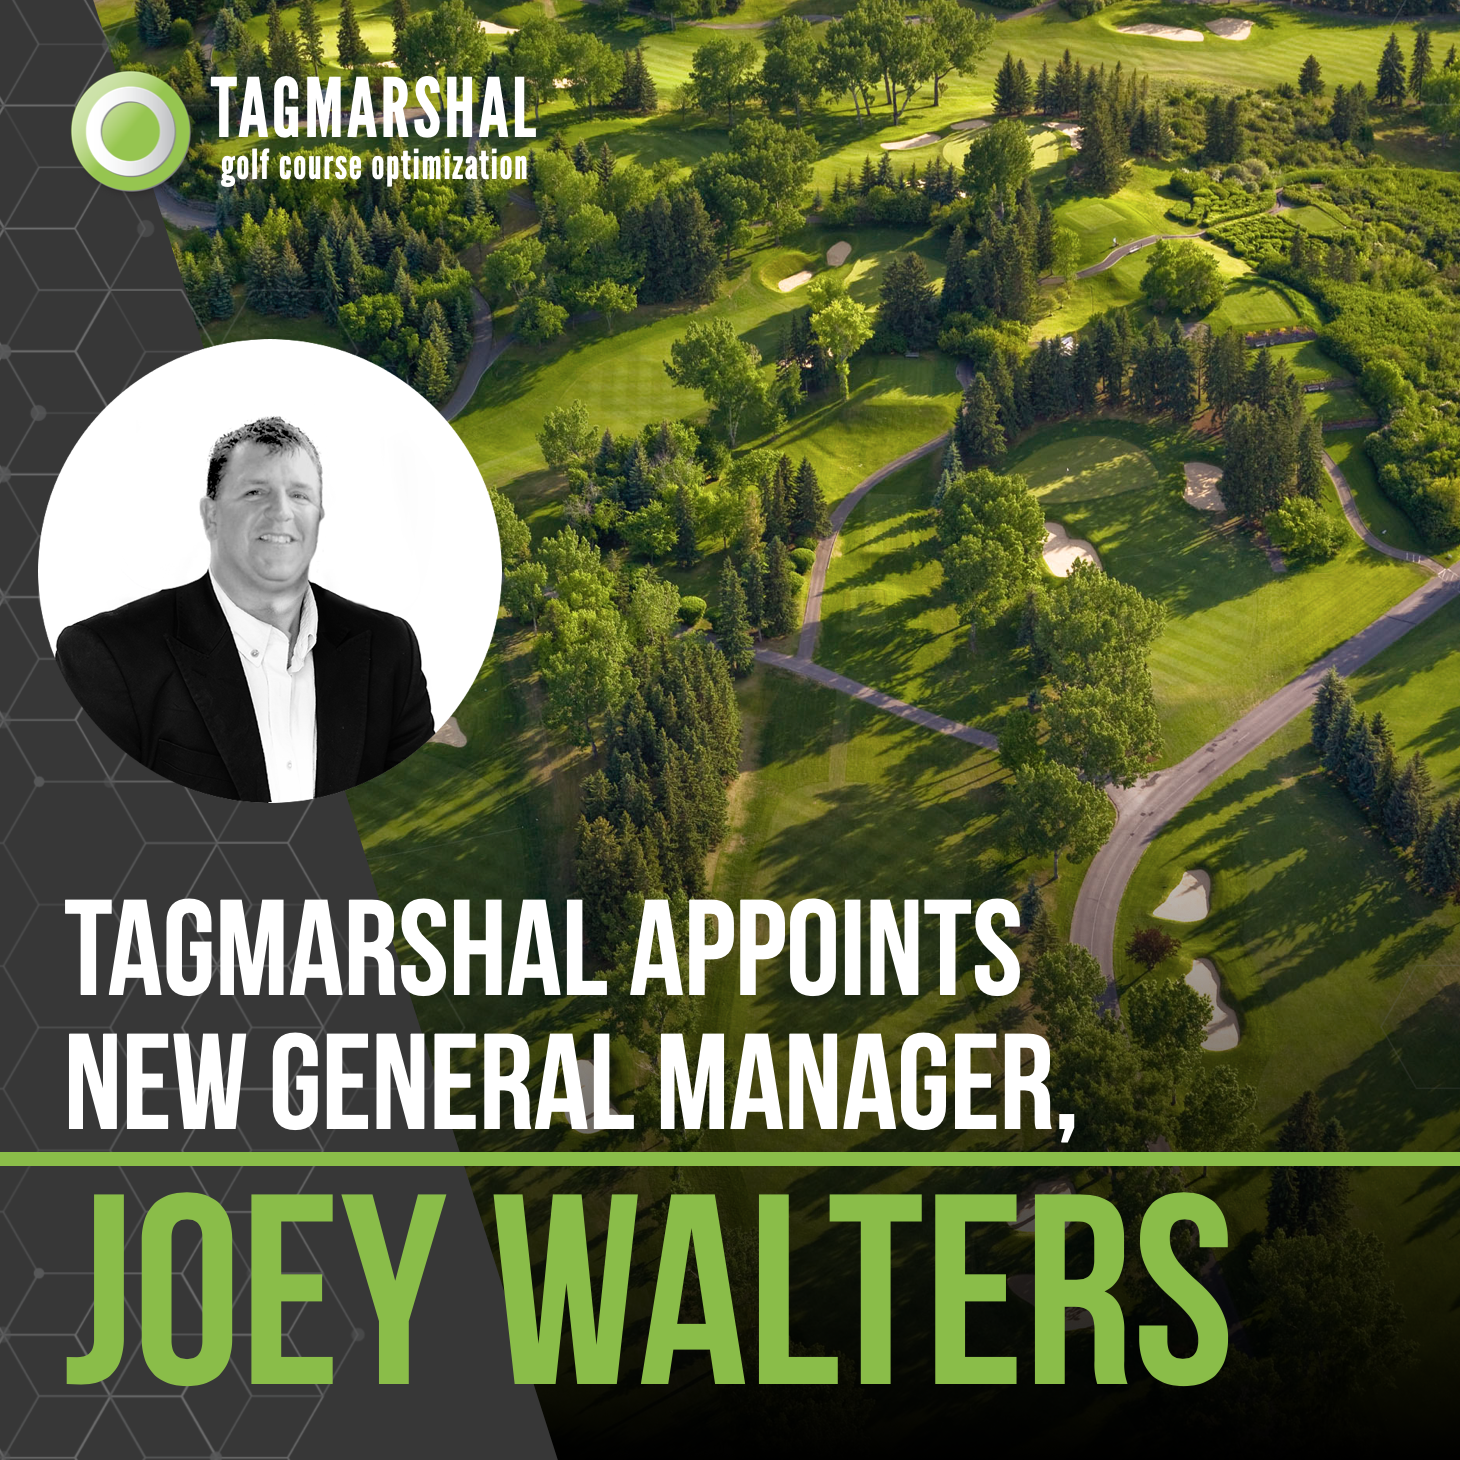 Tagmarshal, Course Optimization Experts, Appoint Joey Walters, General Manager